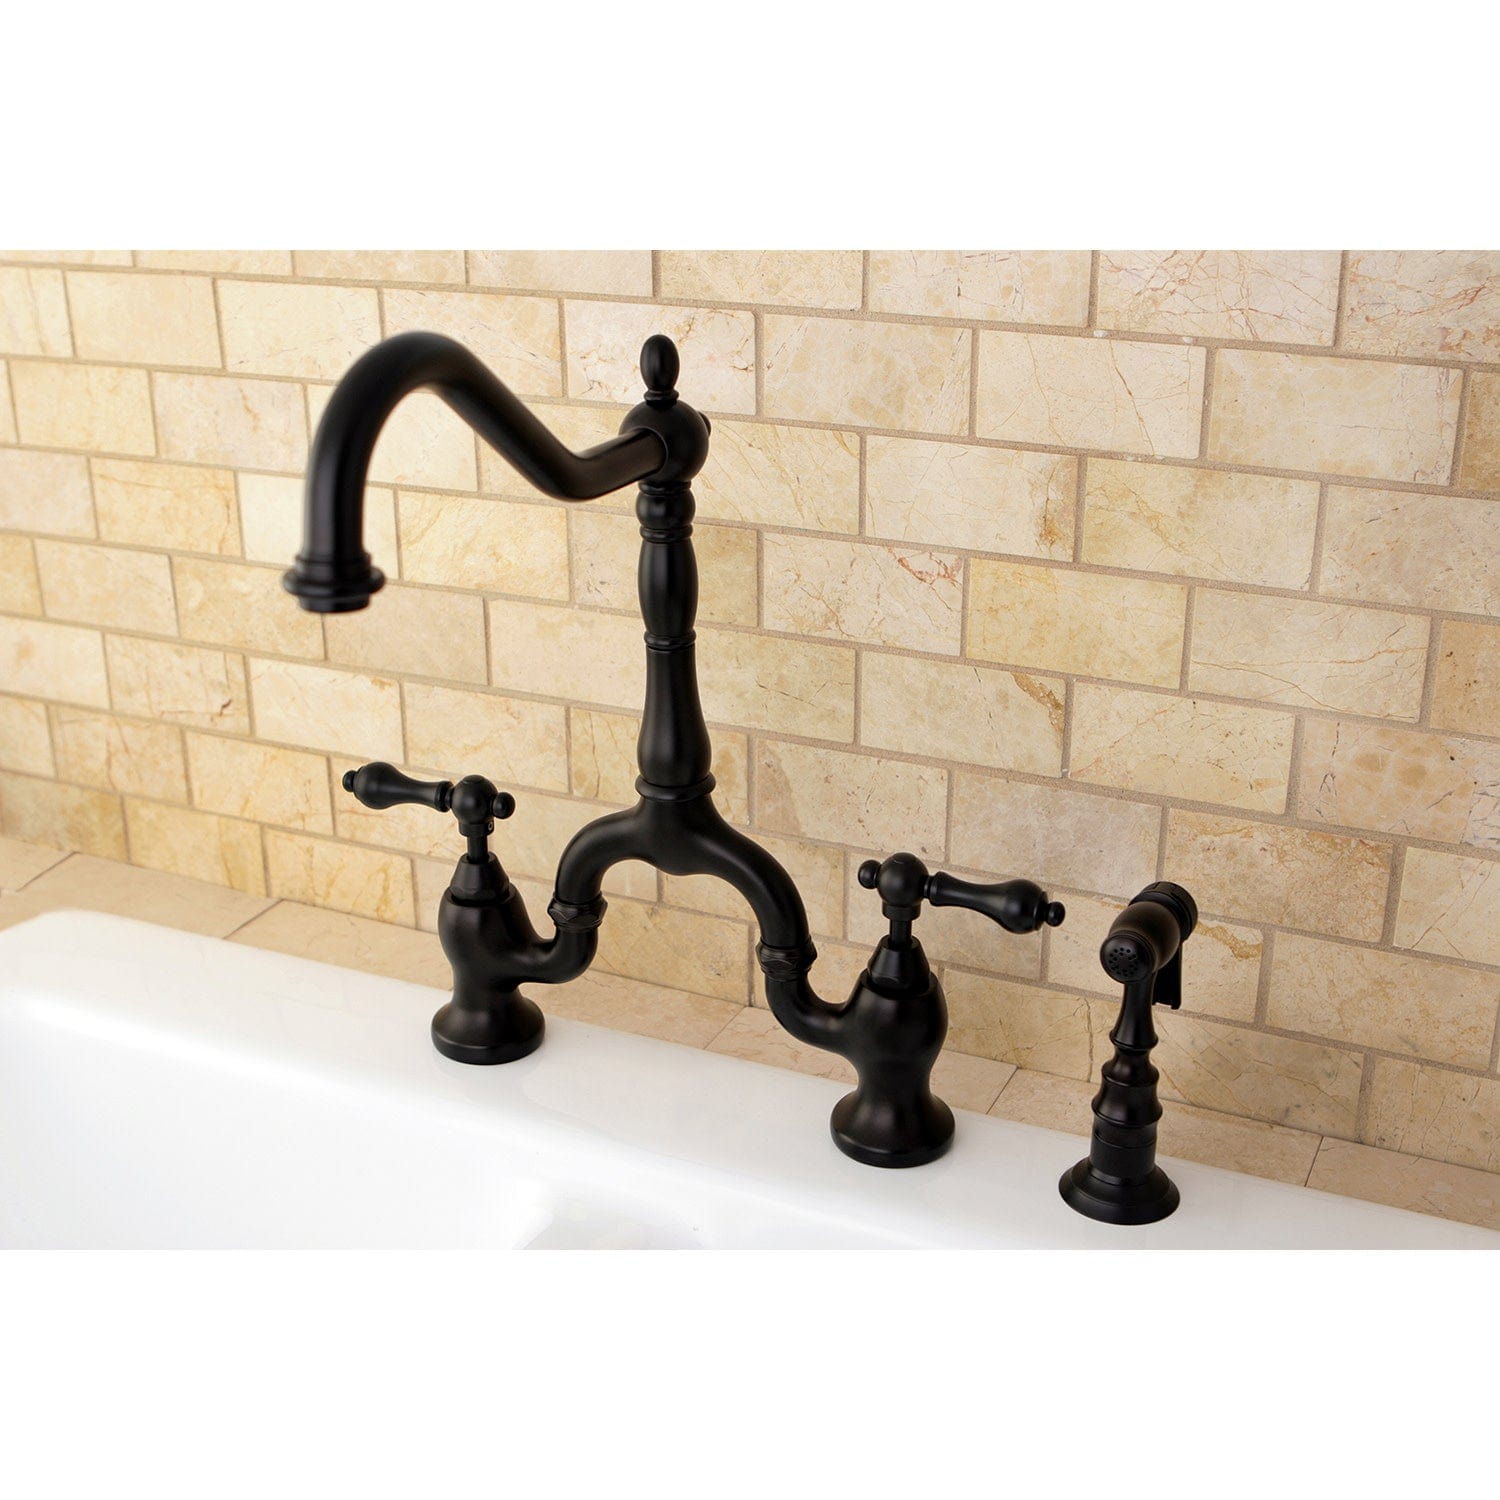 KINGSTON Brass English Country Kitchen Bridge Faucet with Brass Sprayer - Oil Rubbed Bronze